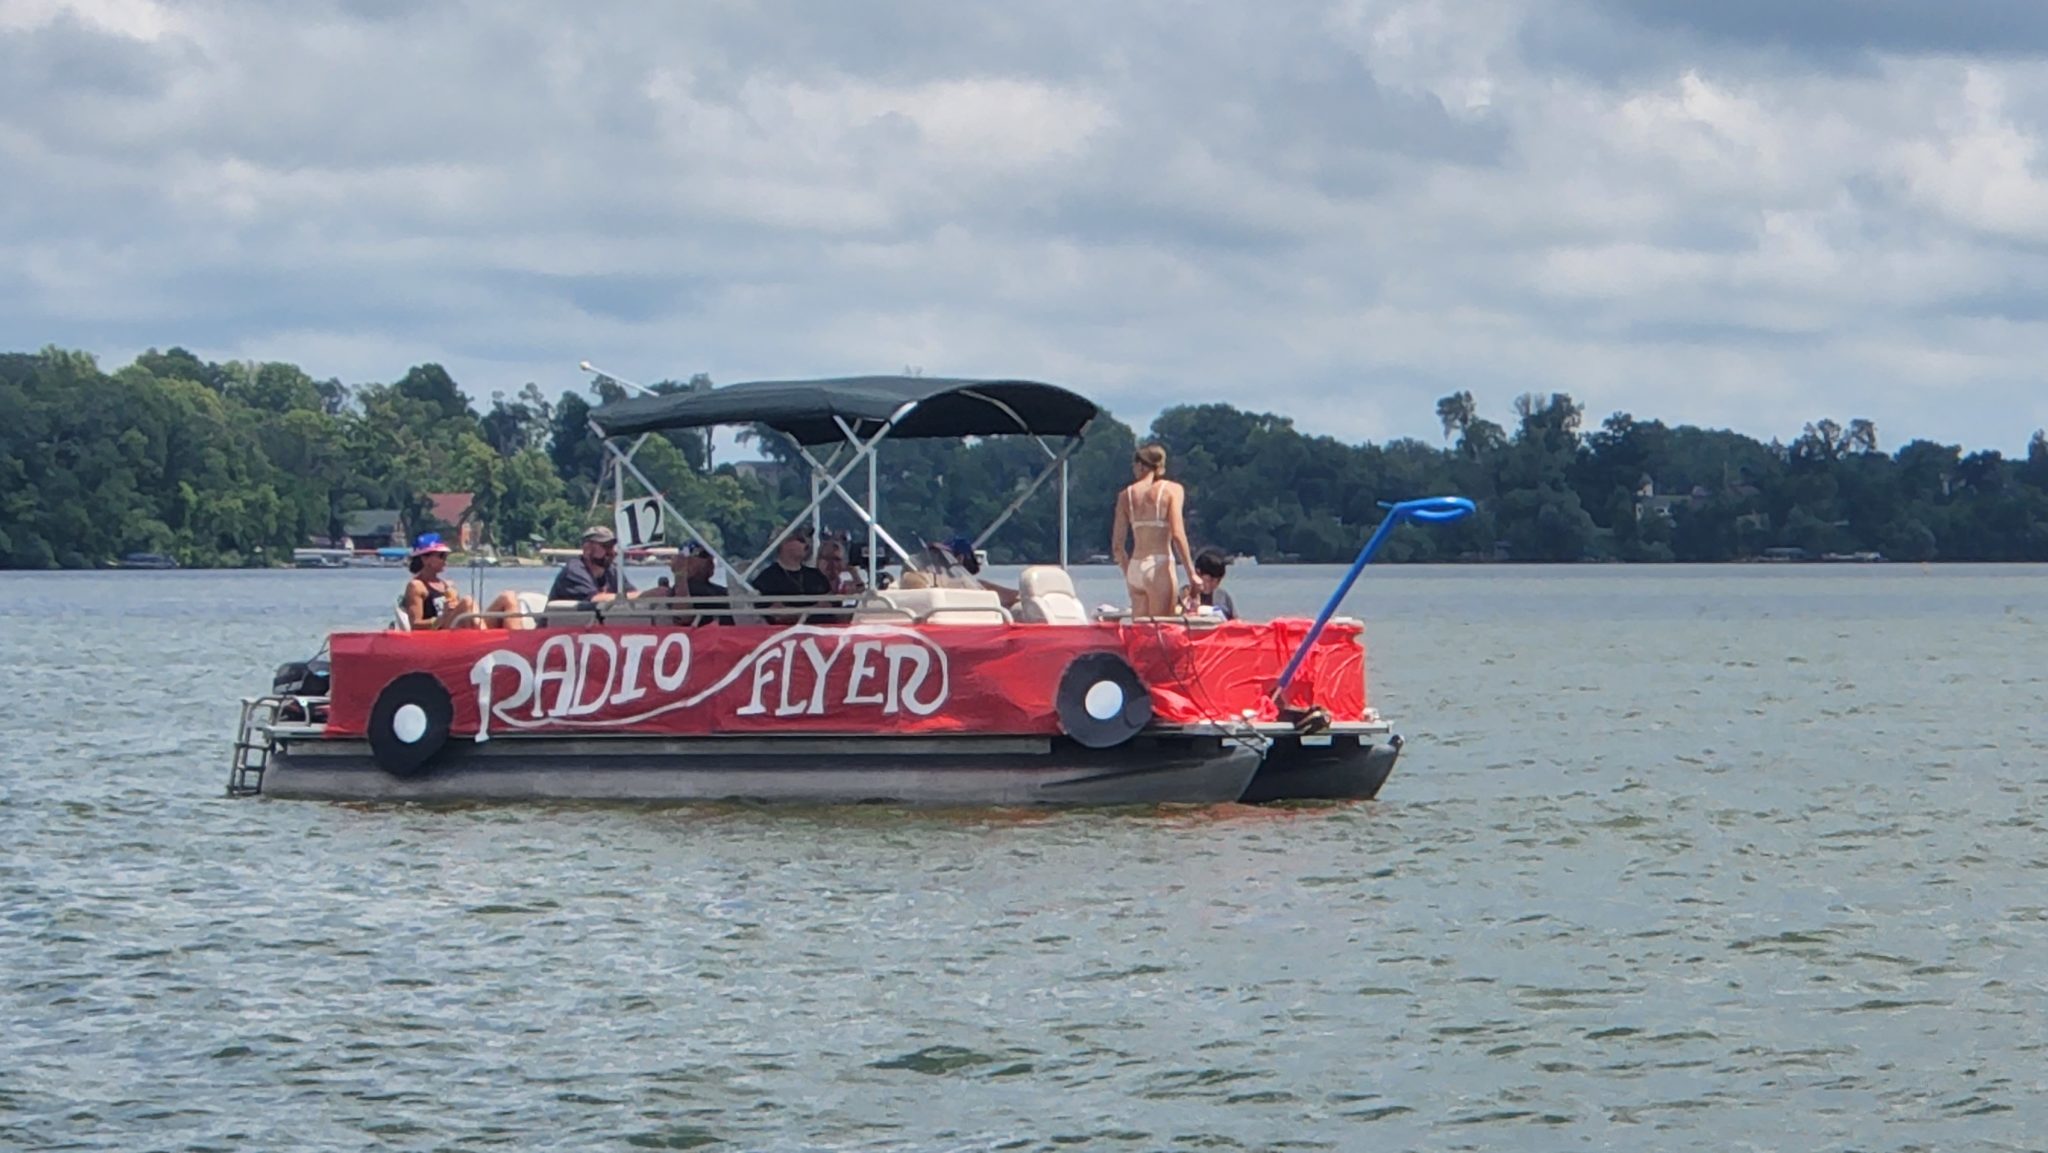 Photo of one of the floats from the 2022 Boat Parade - The Radio Flyer